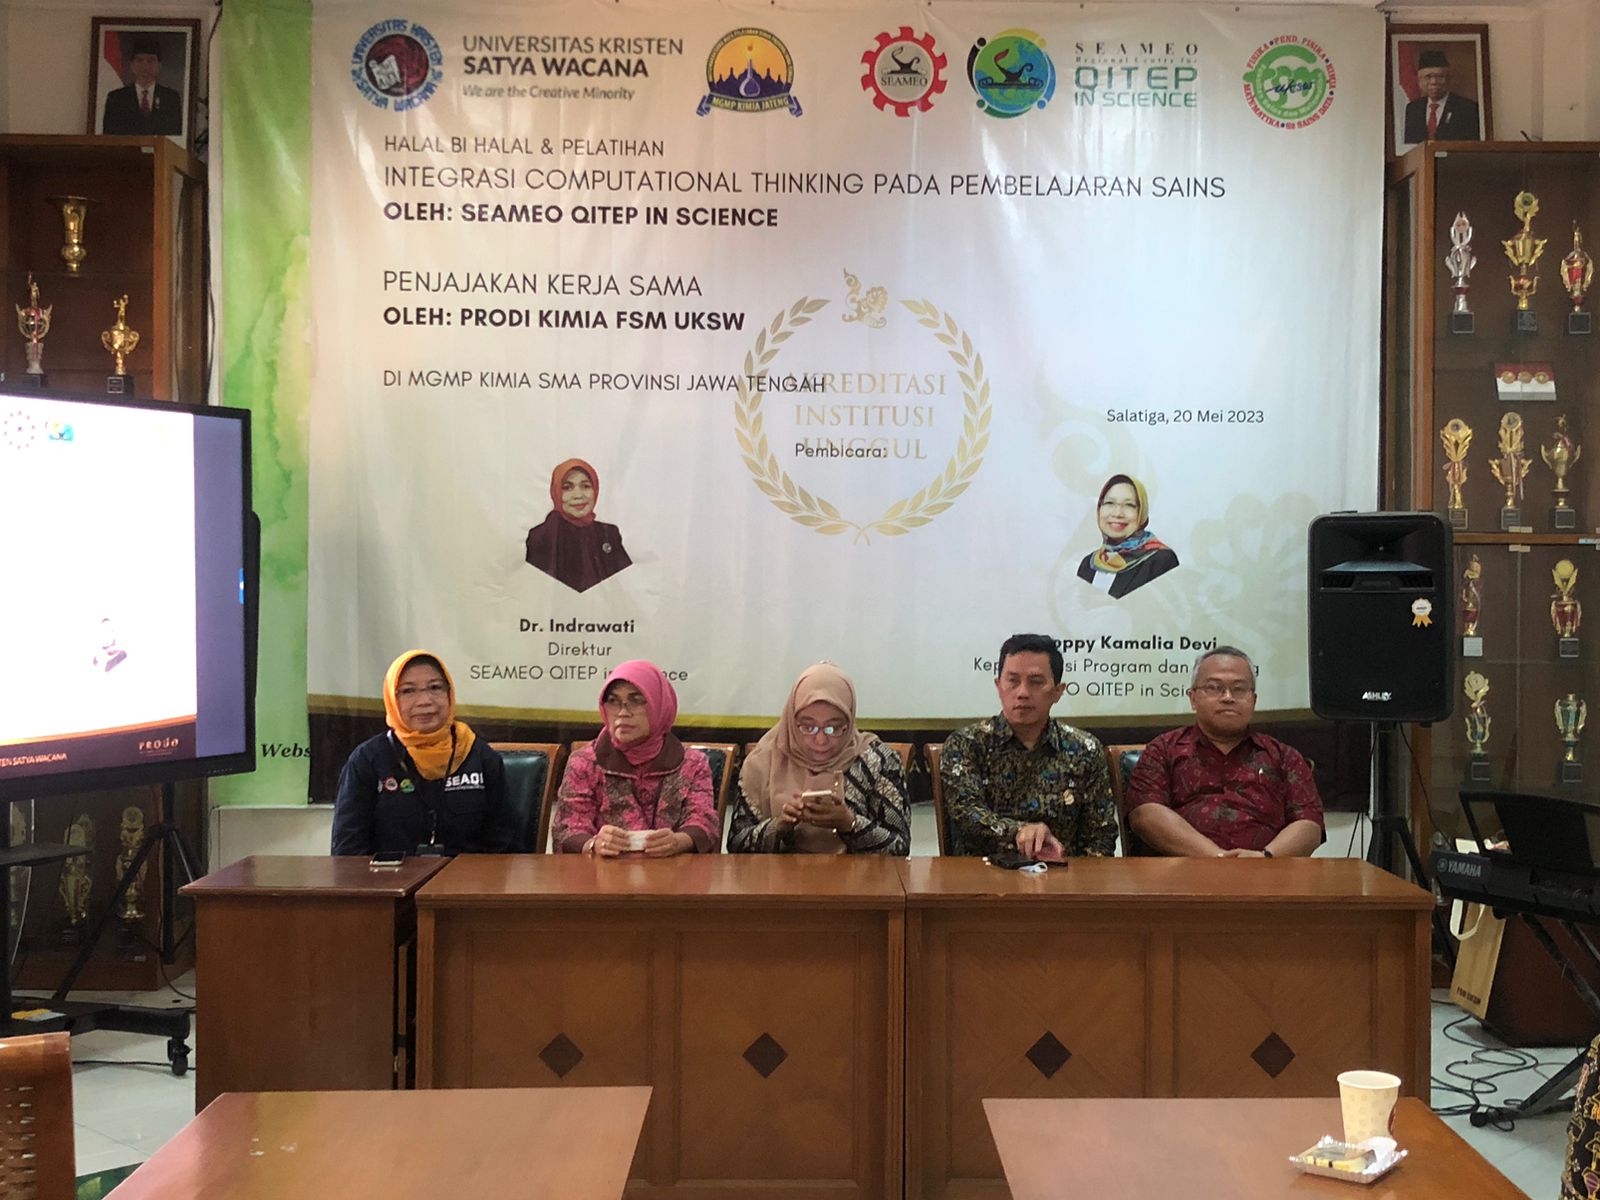 CT Integration Training for Core Chemistry Teachers in Central Java